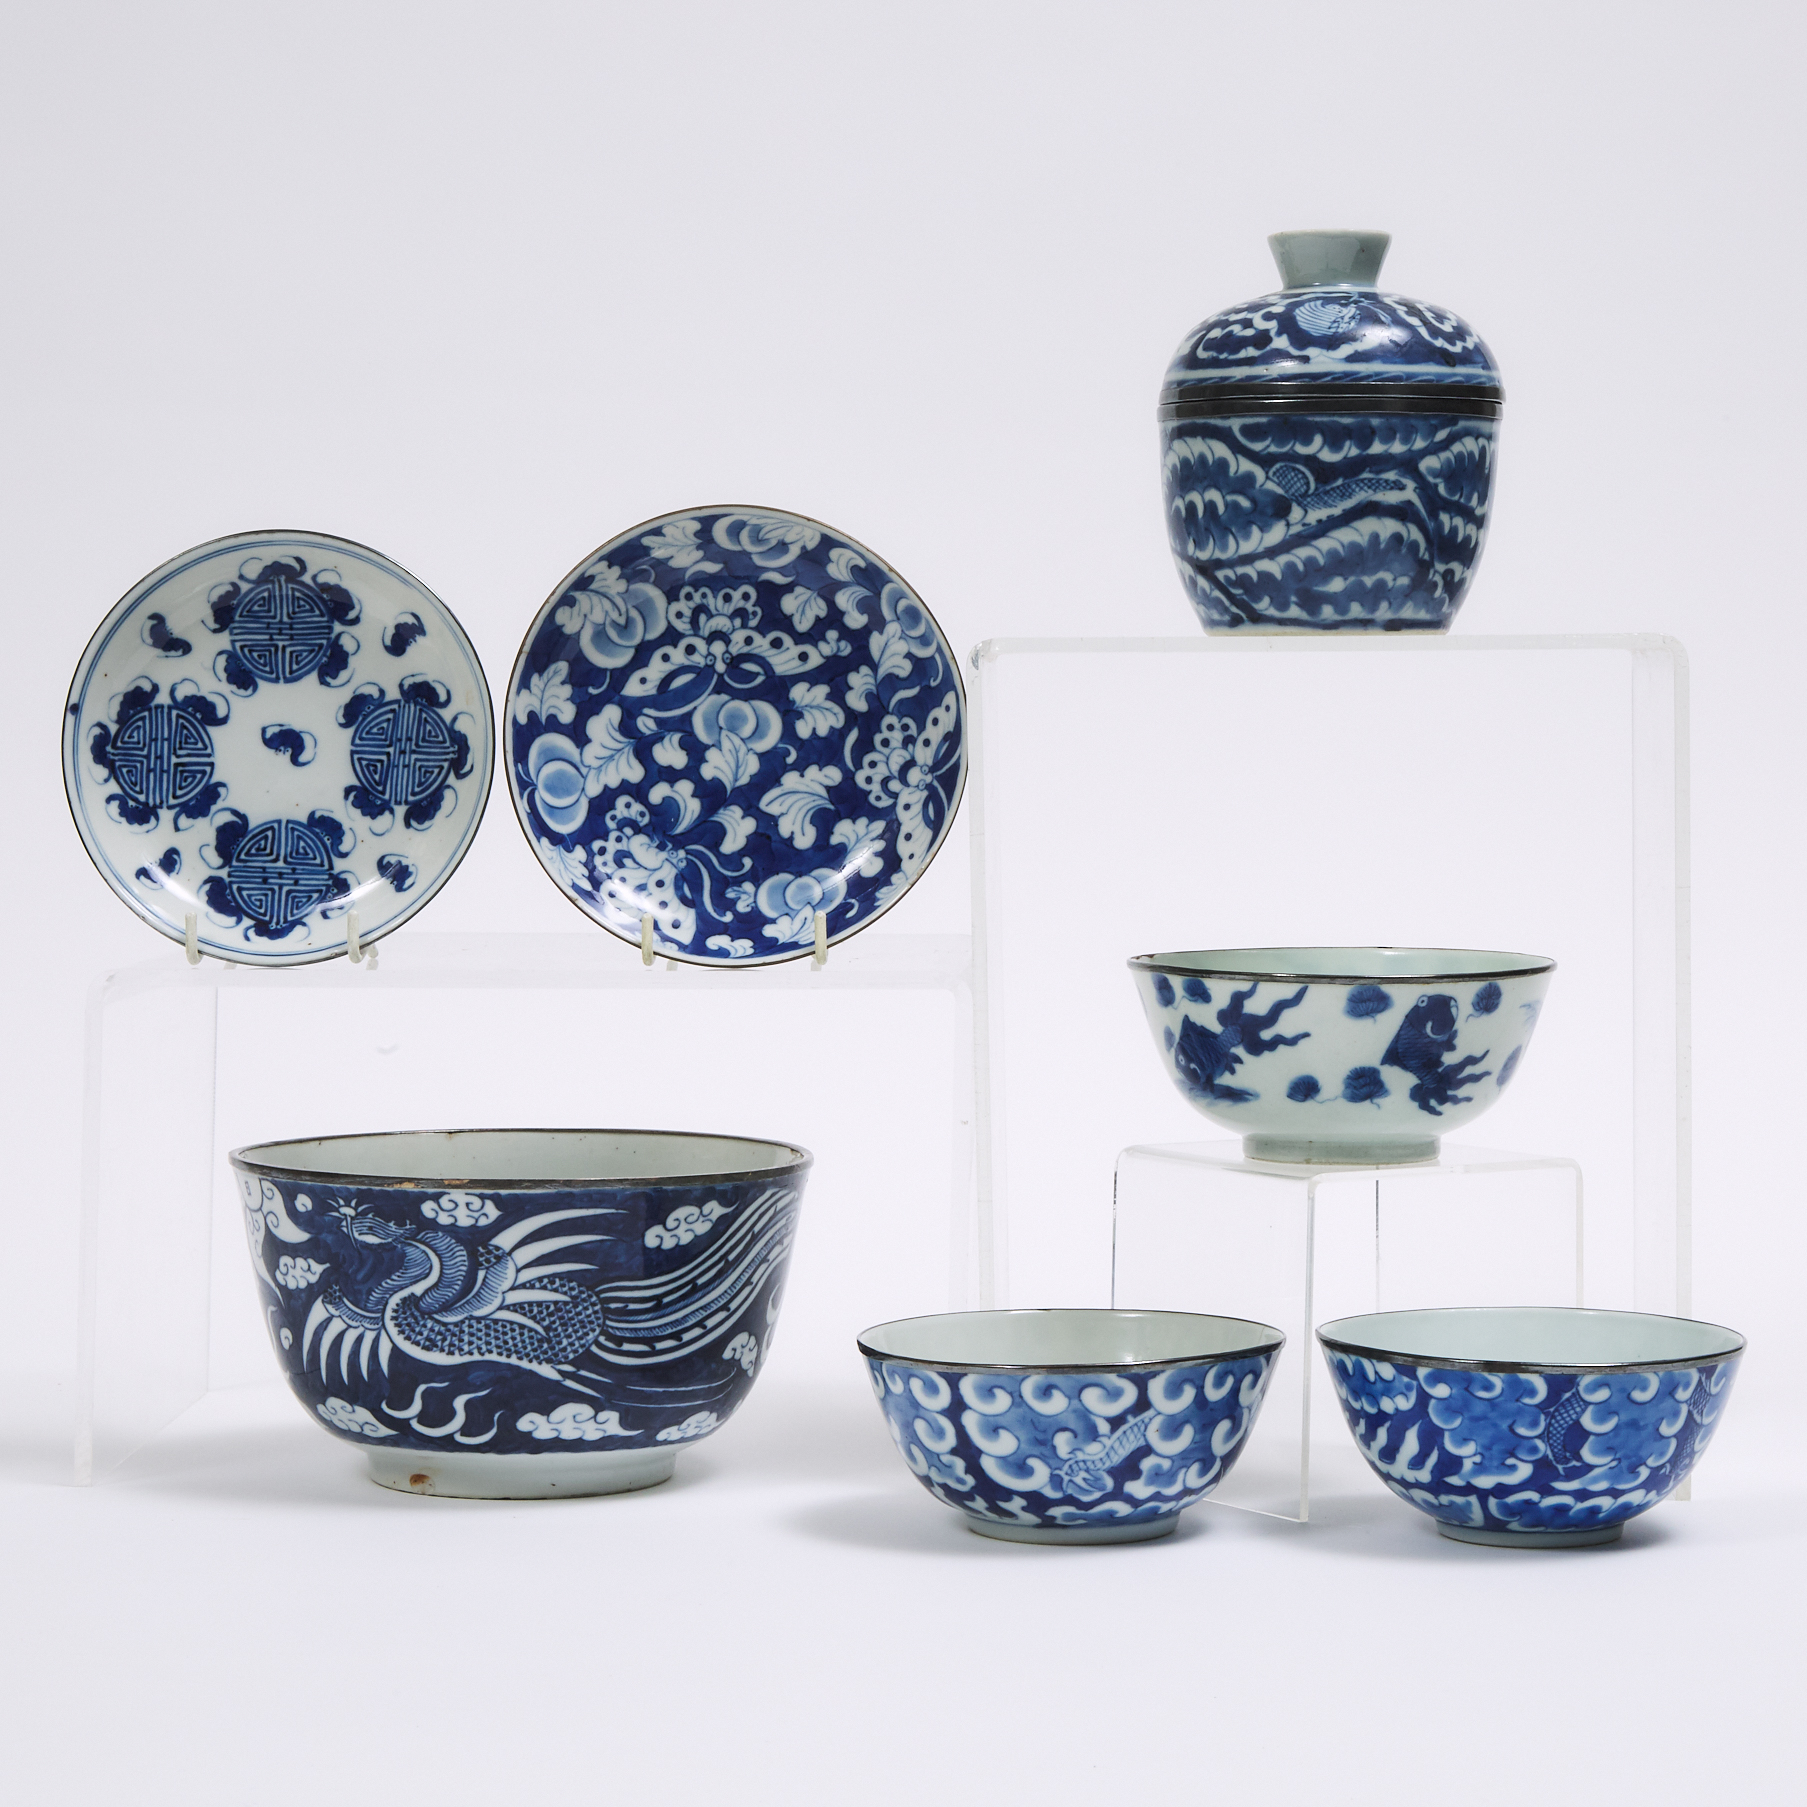 A Group of Seven Blue and White Porcelain Wares, Late Qing Dynasty